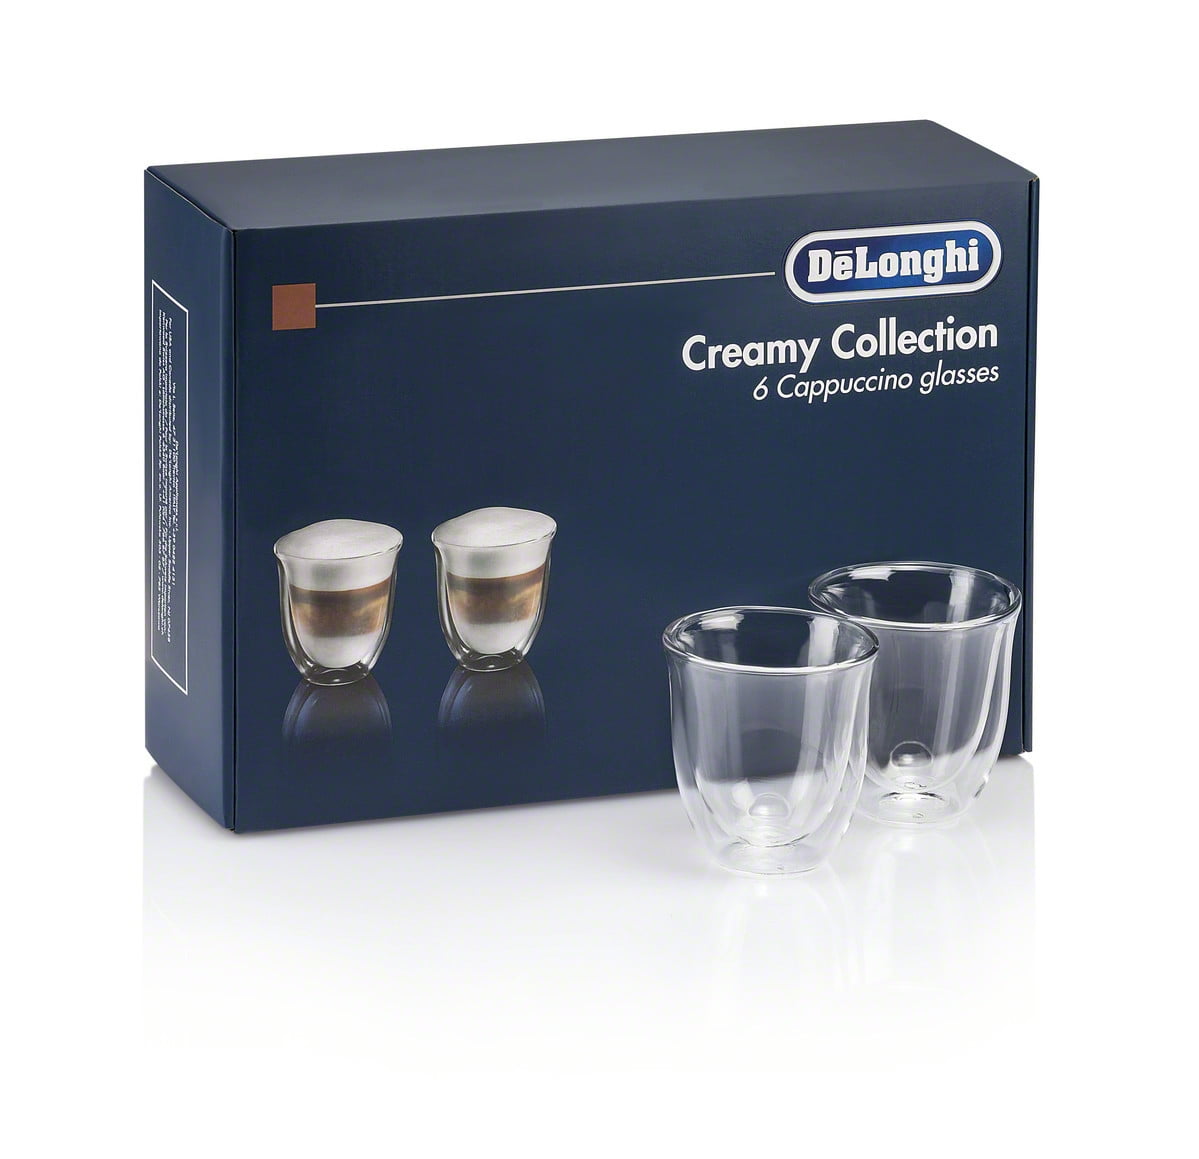 De'Longhi Double Wall Thermo Glasses